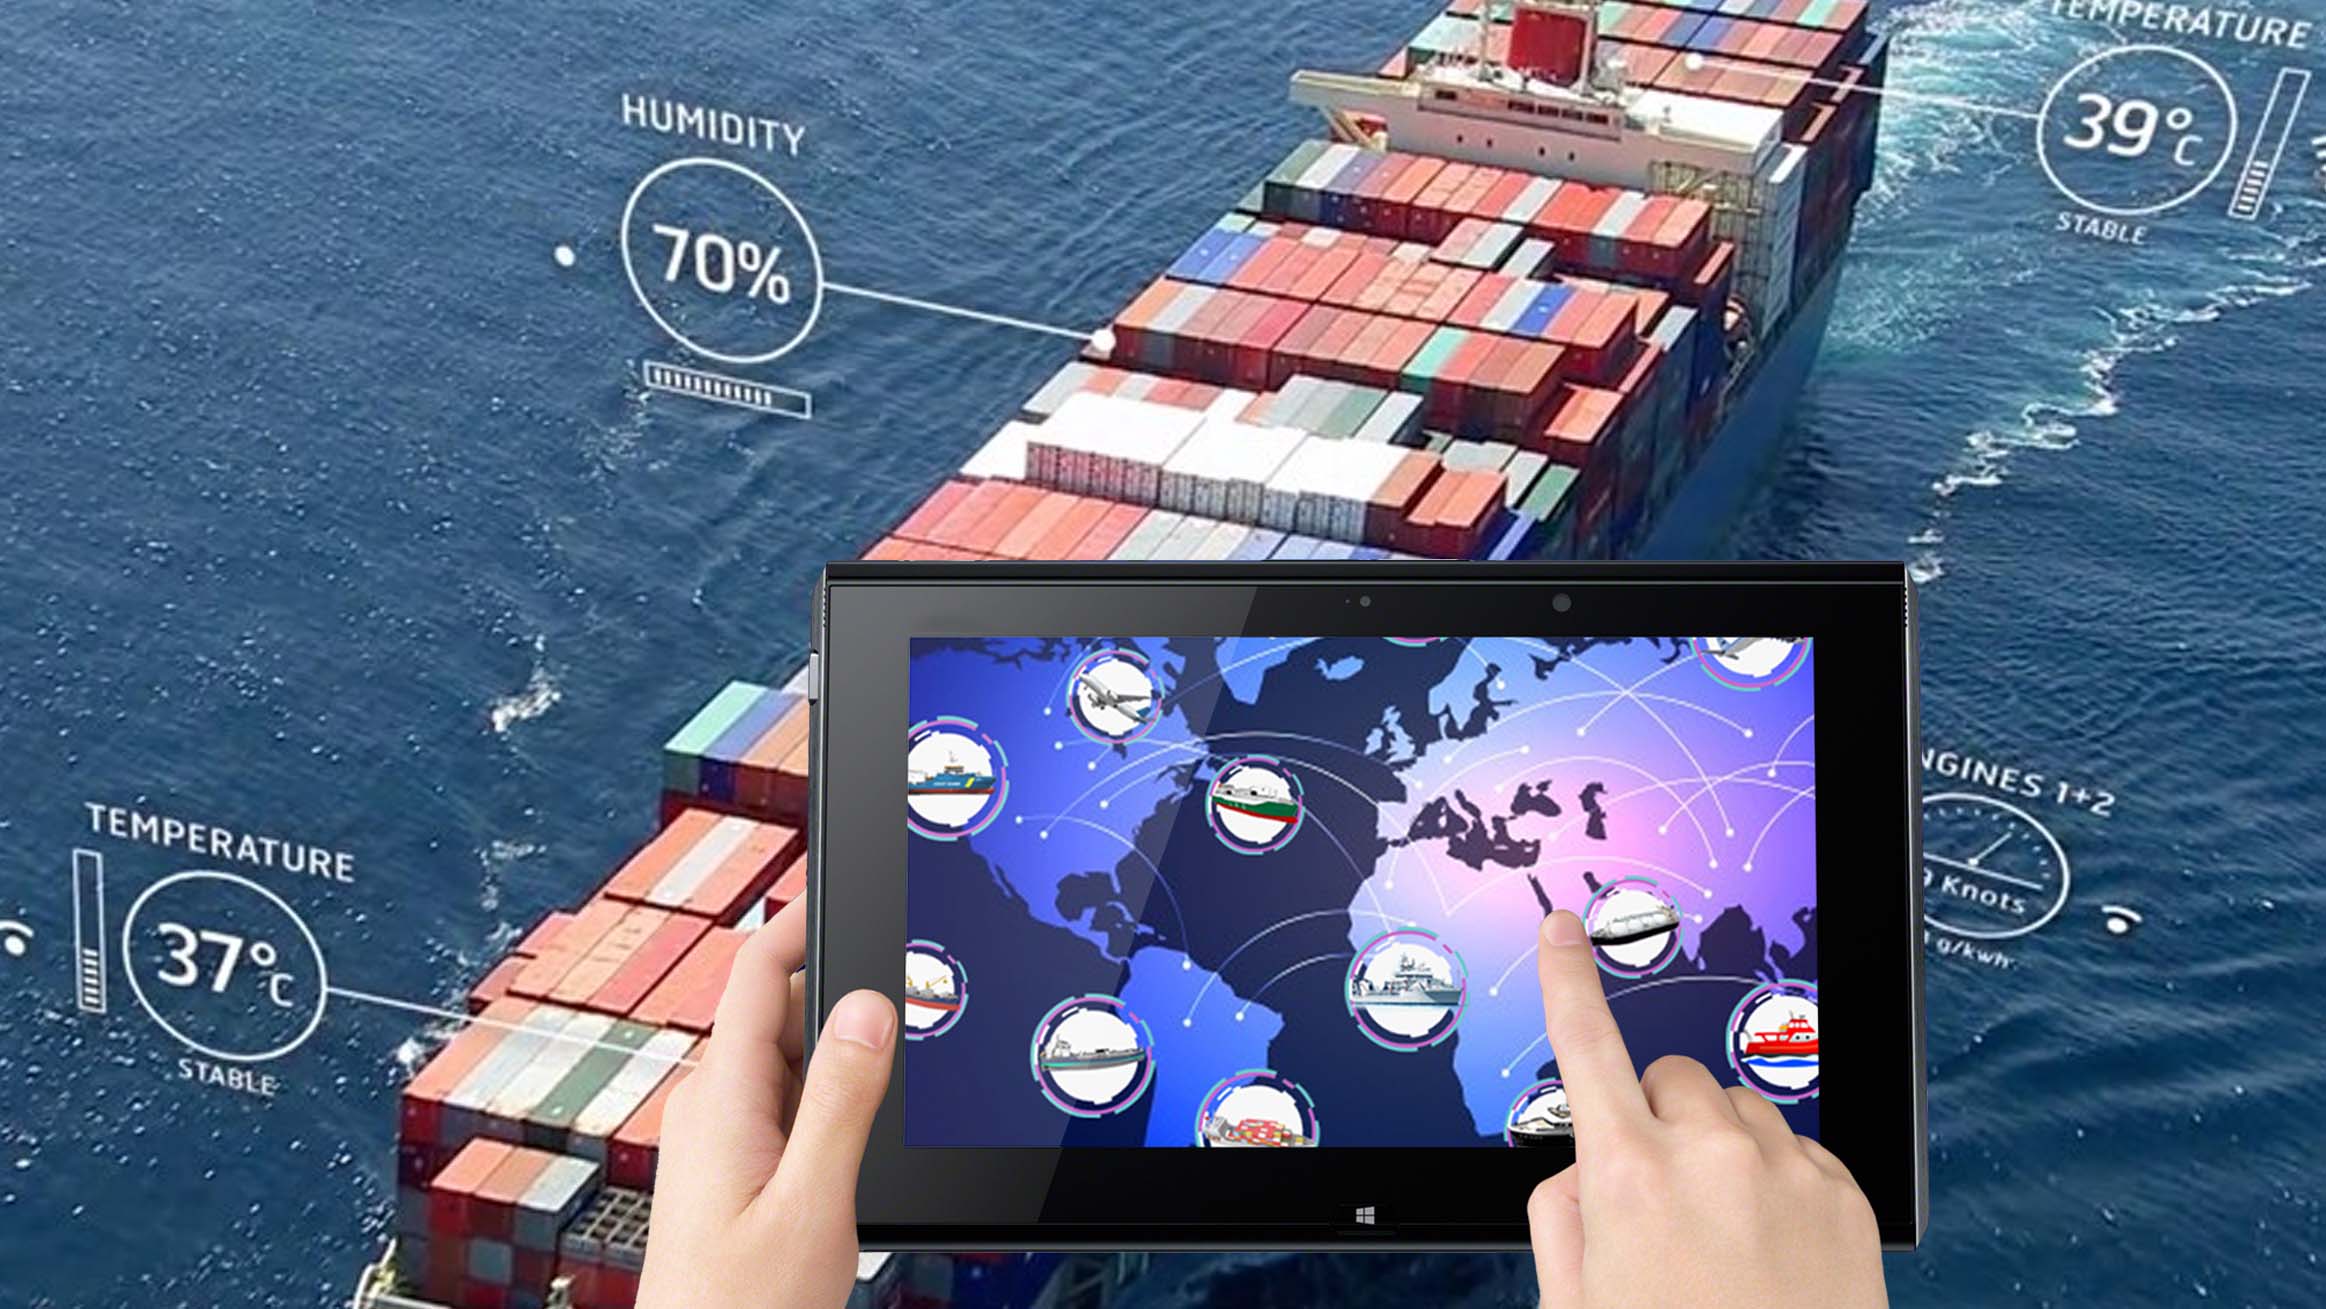 Autonomous Ship controlled and monitored using phone tablet in a remote location